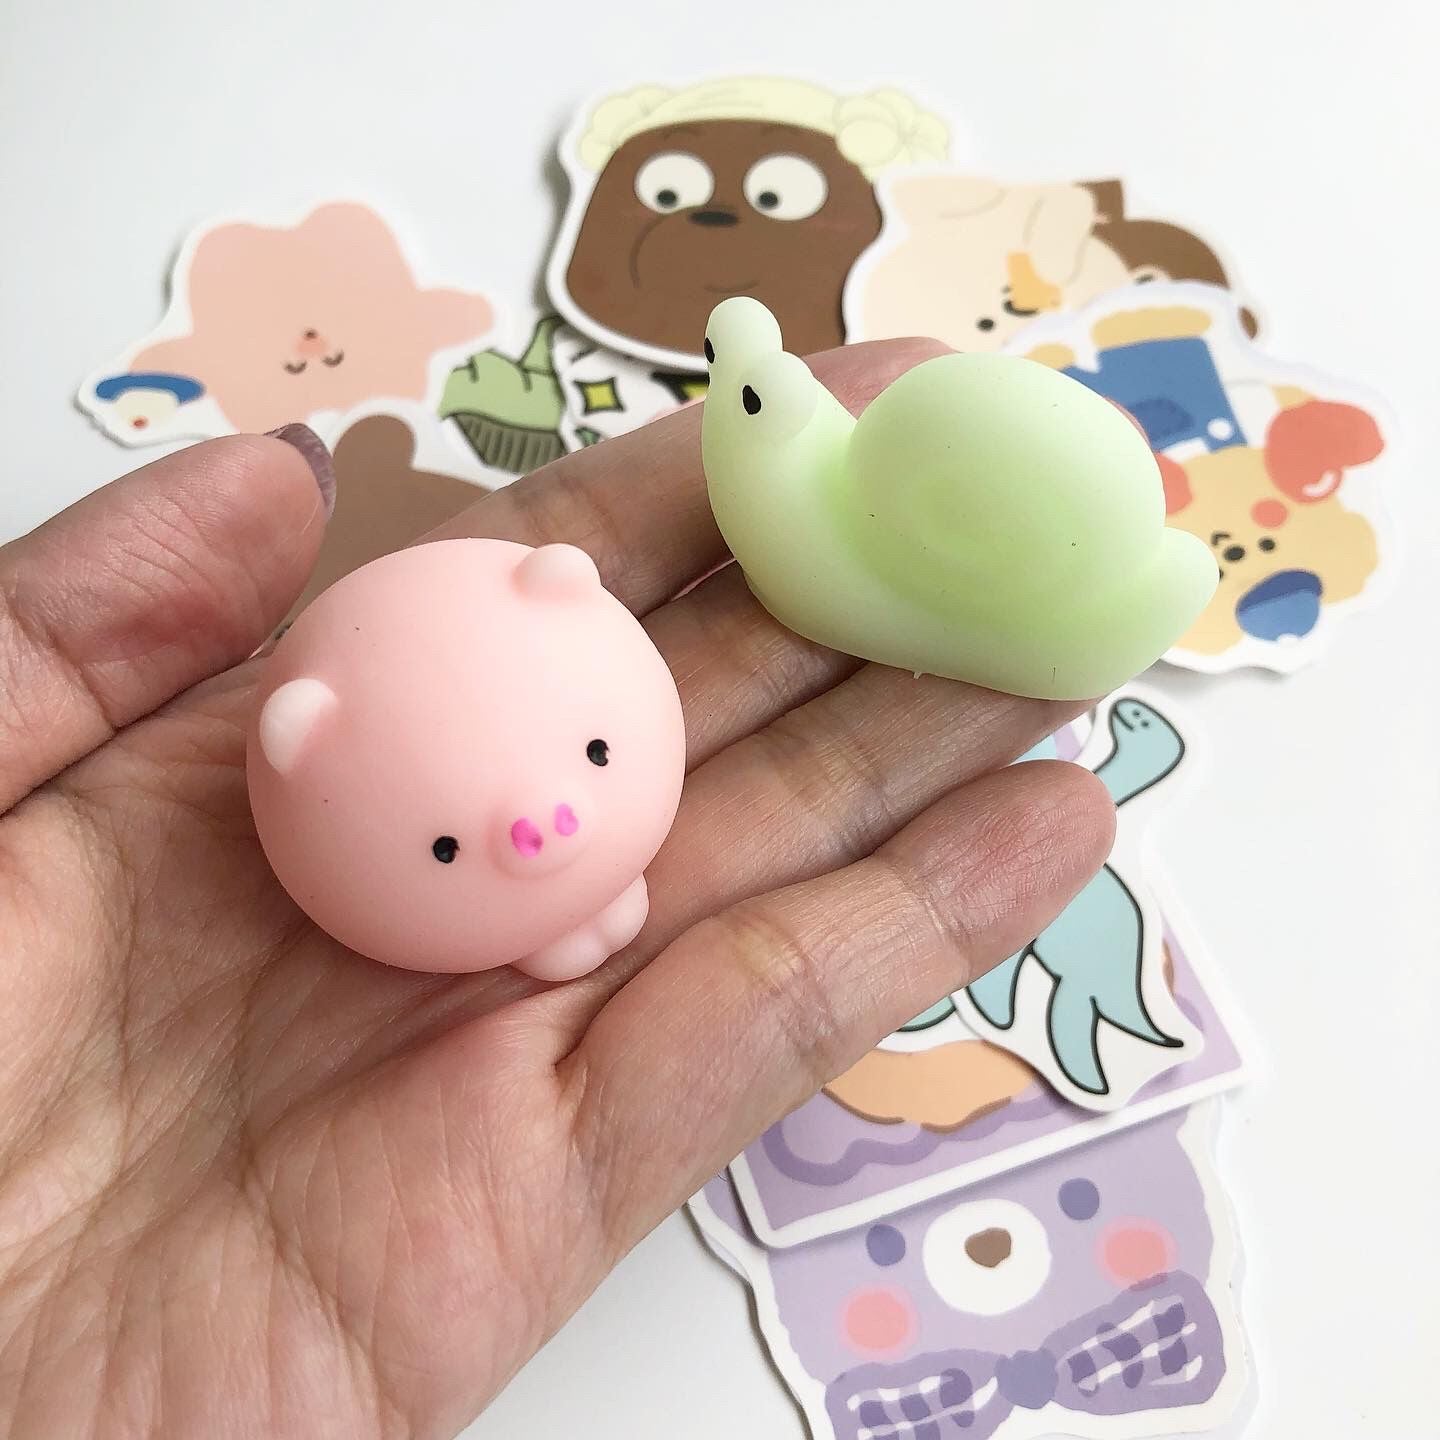 Squishy Party Packs!